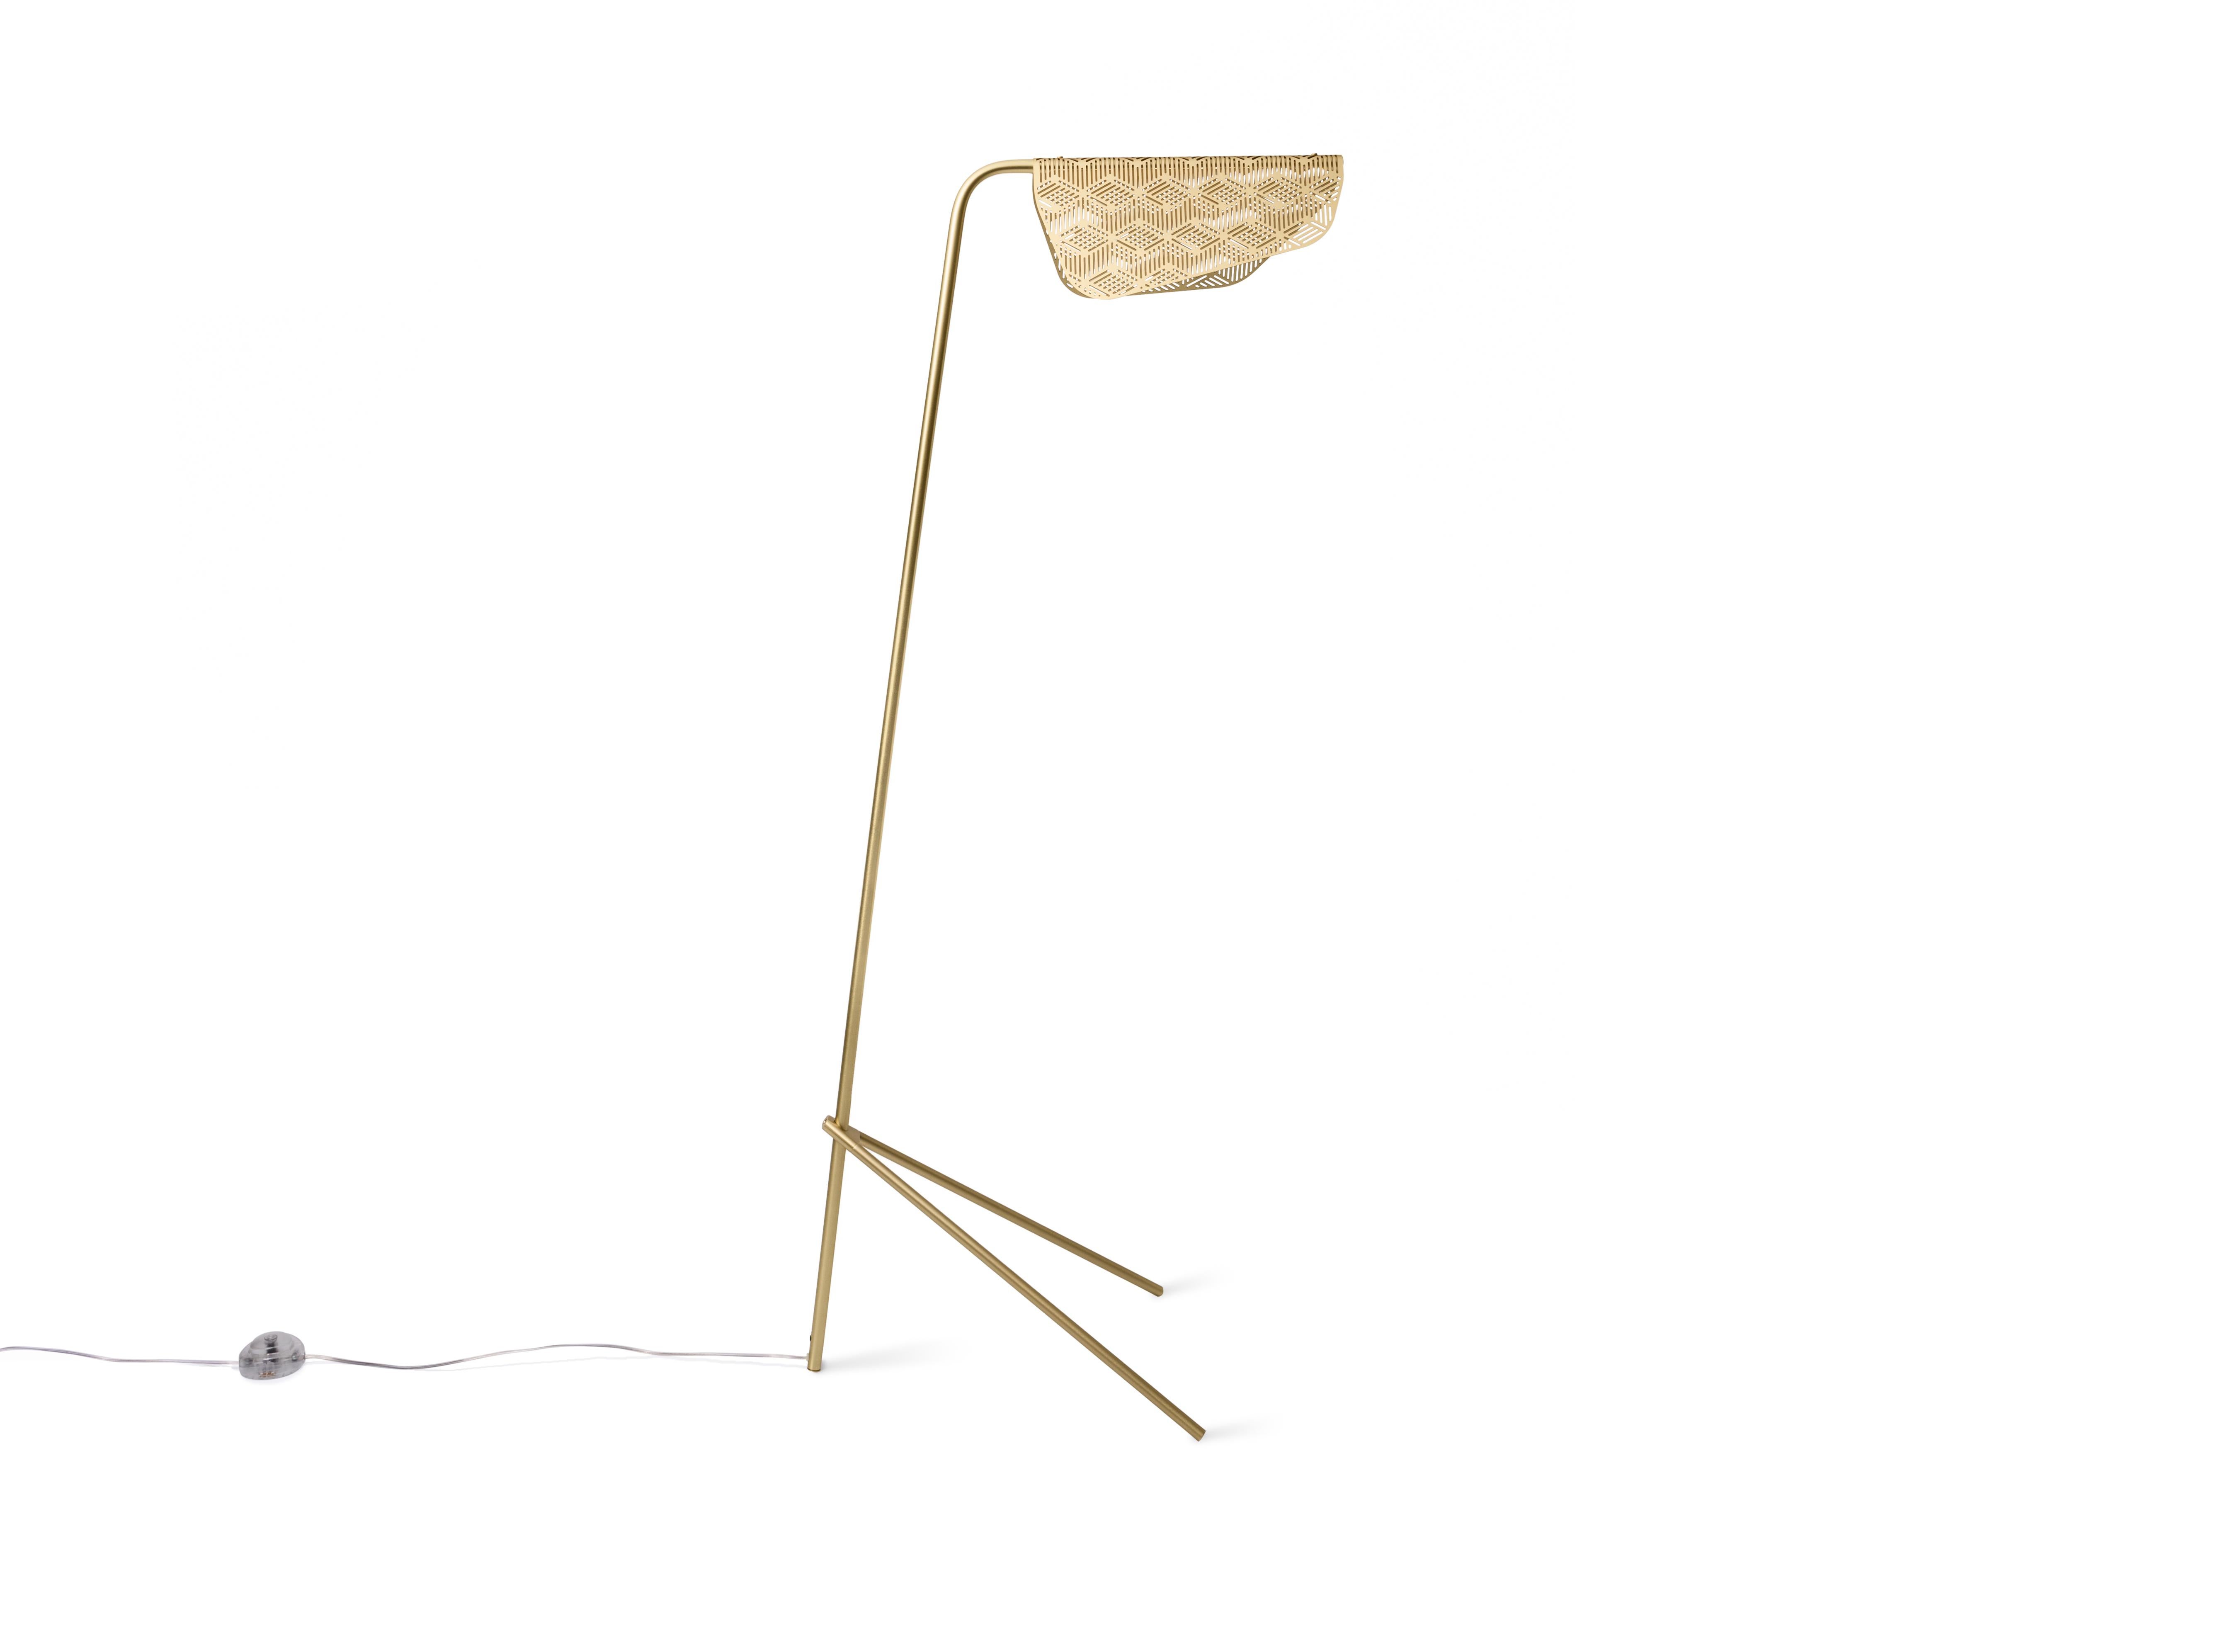 Petite Friture Mediterranea Floor Lamp in Brass by Noé Duchaufour-Lawrance, 2016

Inspired by the weightlessness of 